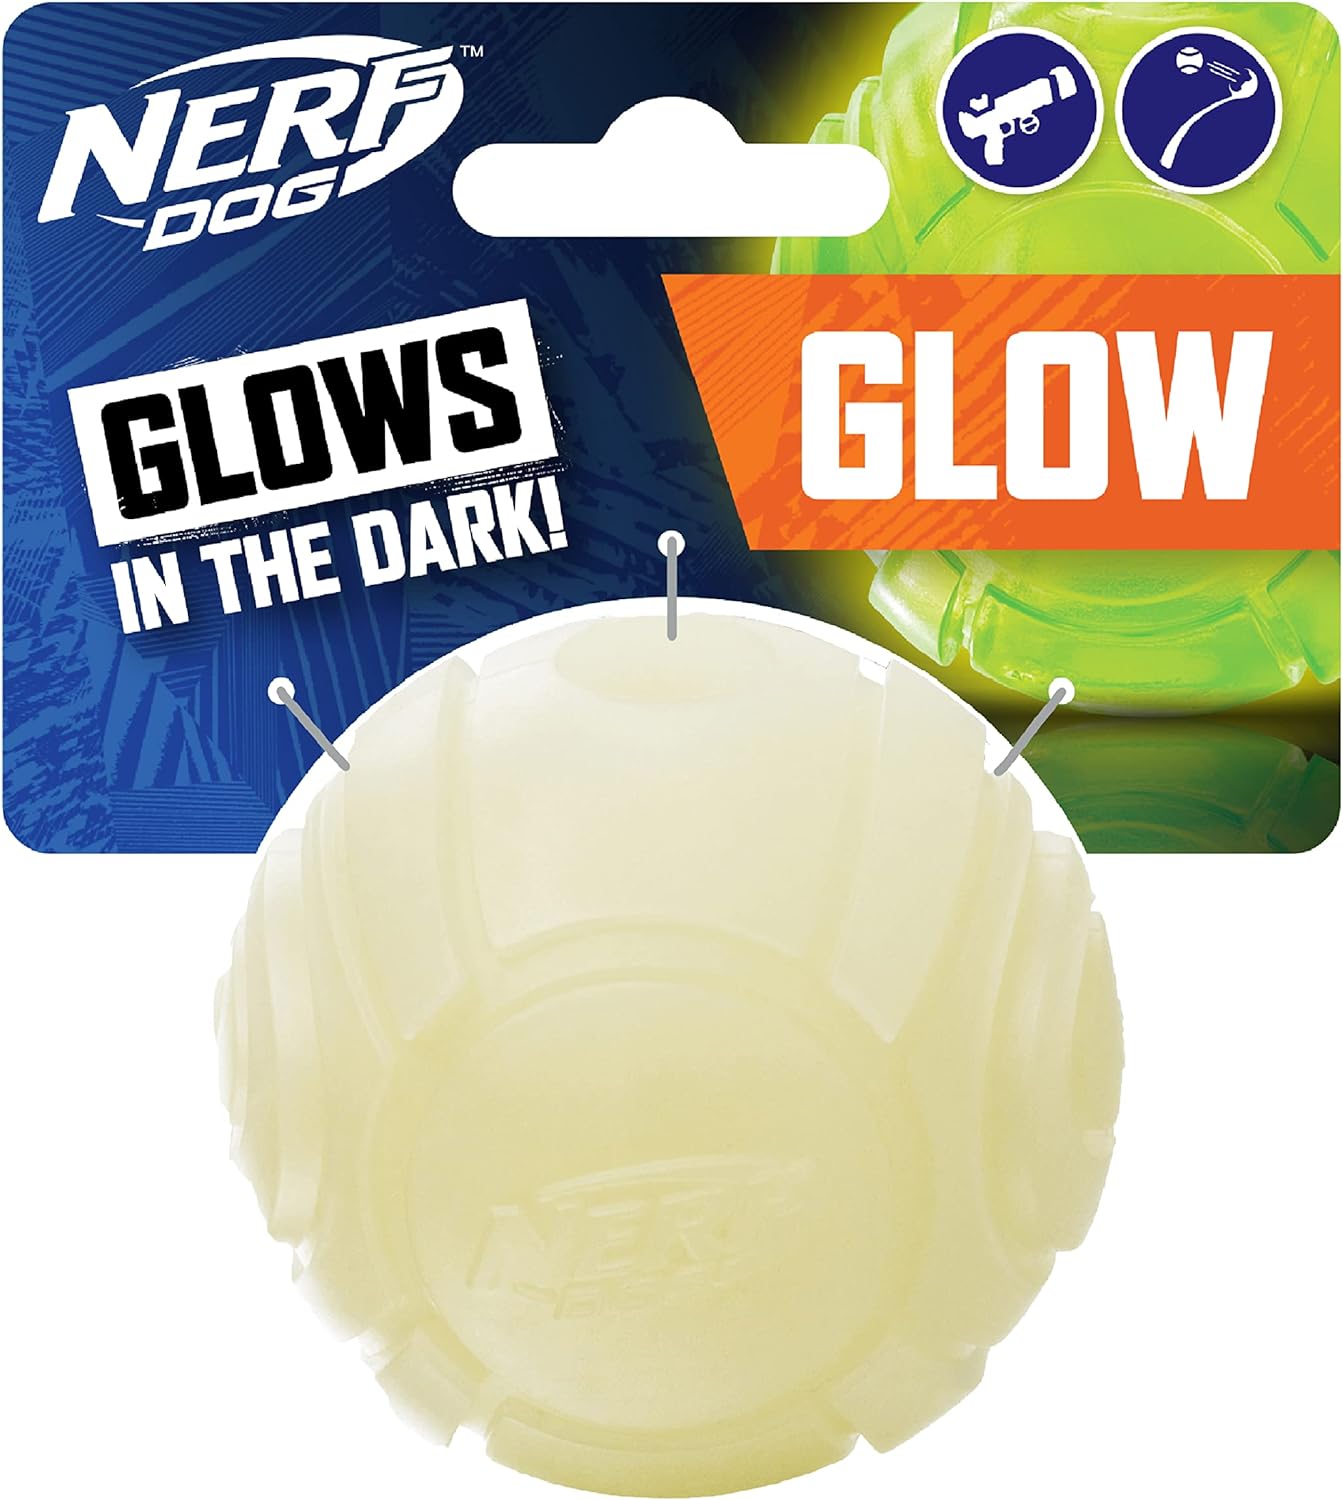 Nerf Dog Glow Ball Dog Toy with Interactive LED, Lightweight, Durable and Water Resistant, 2.5 Inches, for Small/Medium/Large Breeds, Single Unit, No Color